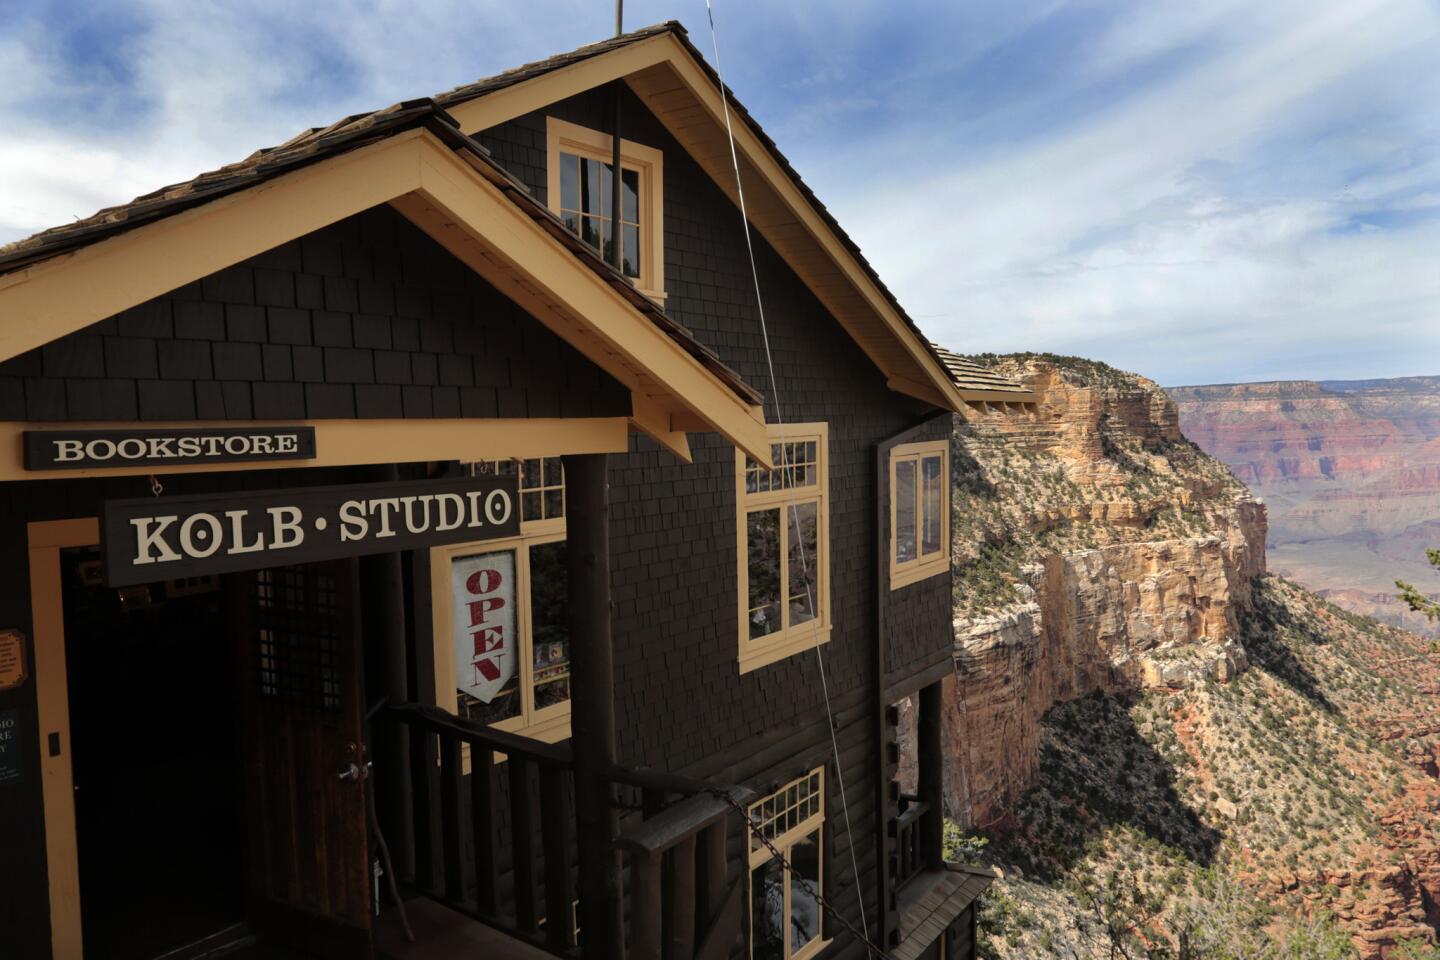 The Kolb Studio is still perched on the South Rim of the Grand Canyon where the Kolb brothers photographed mule riders and the canyon life for 75 years.